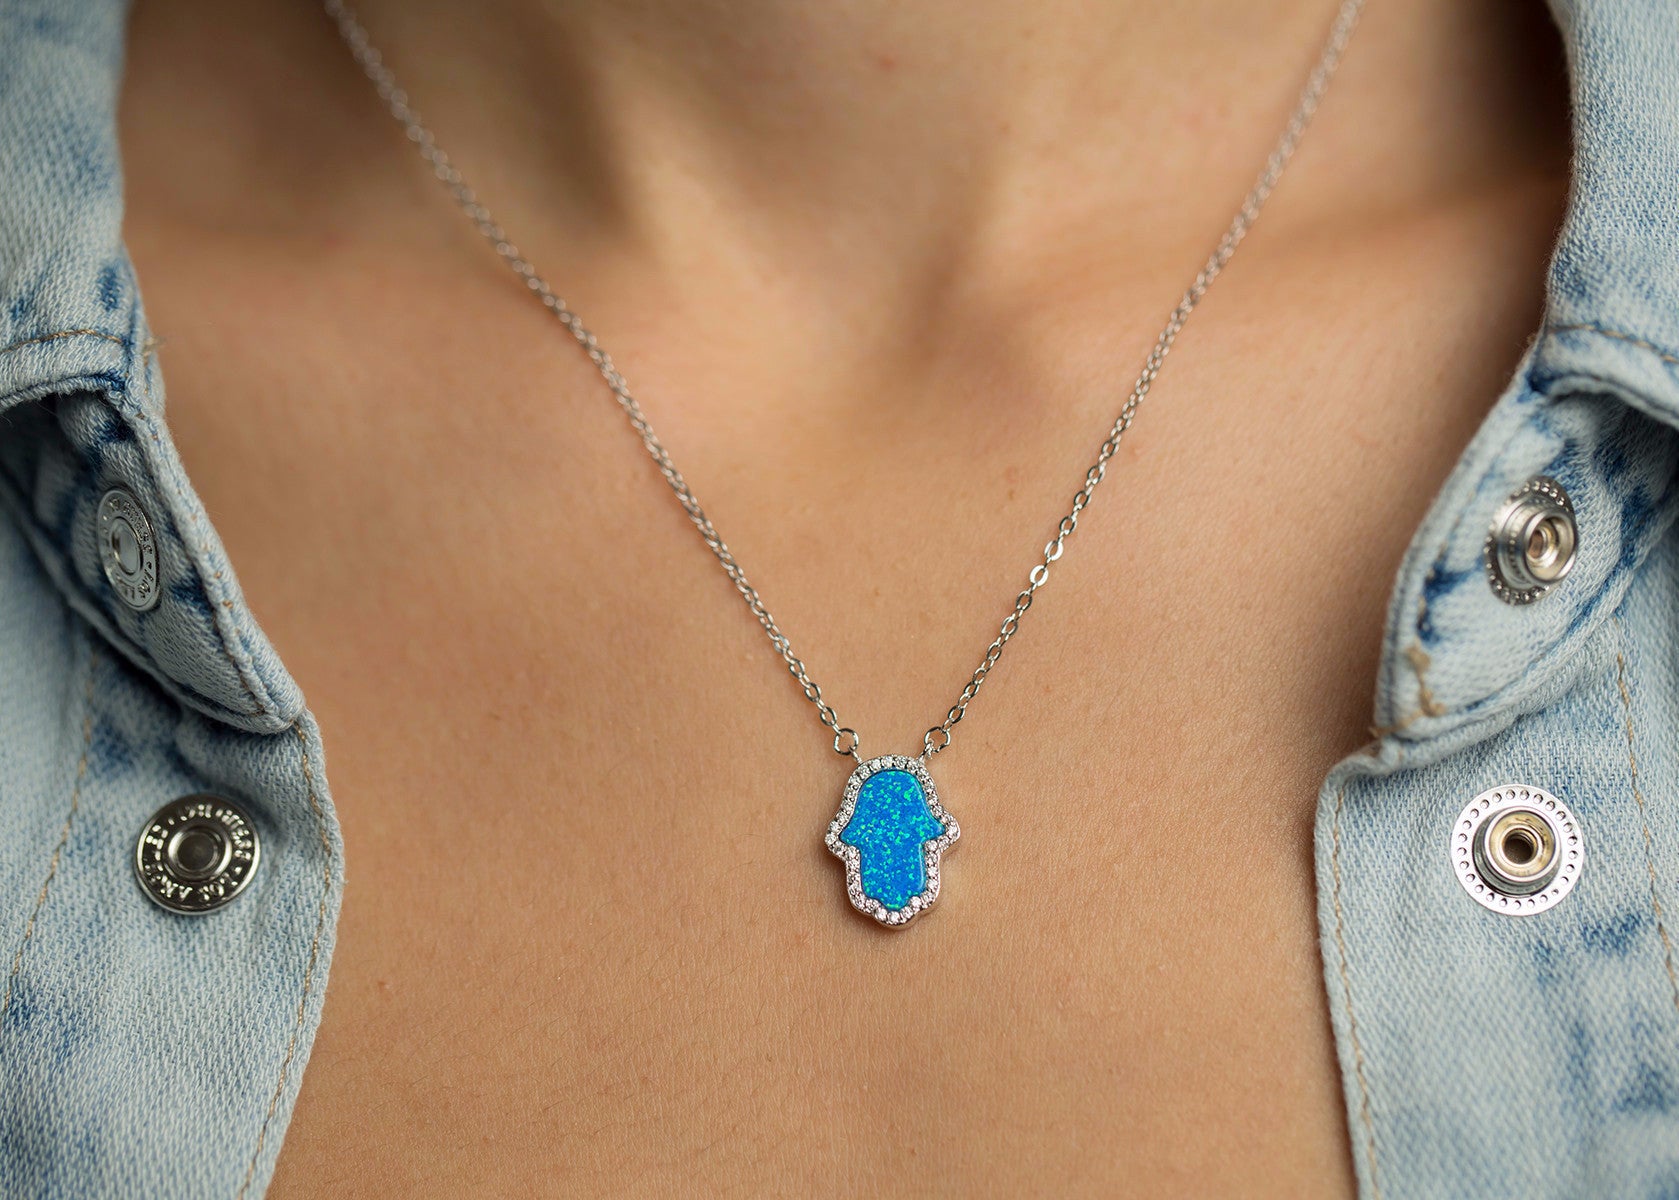 Blue Butterfly pendant Necklace With Silver Chain Locket for women and girls